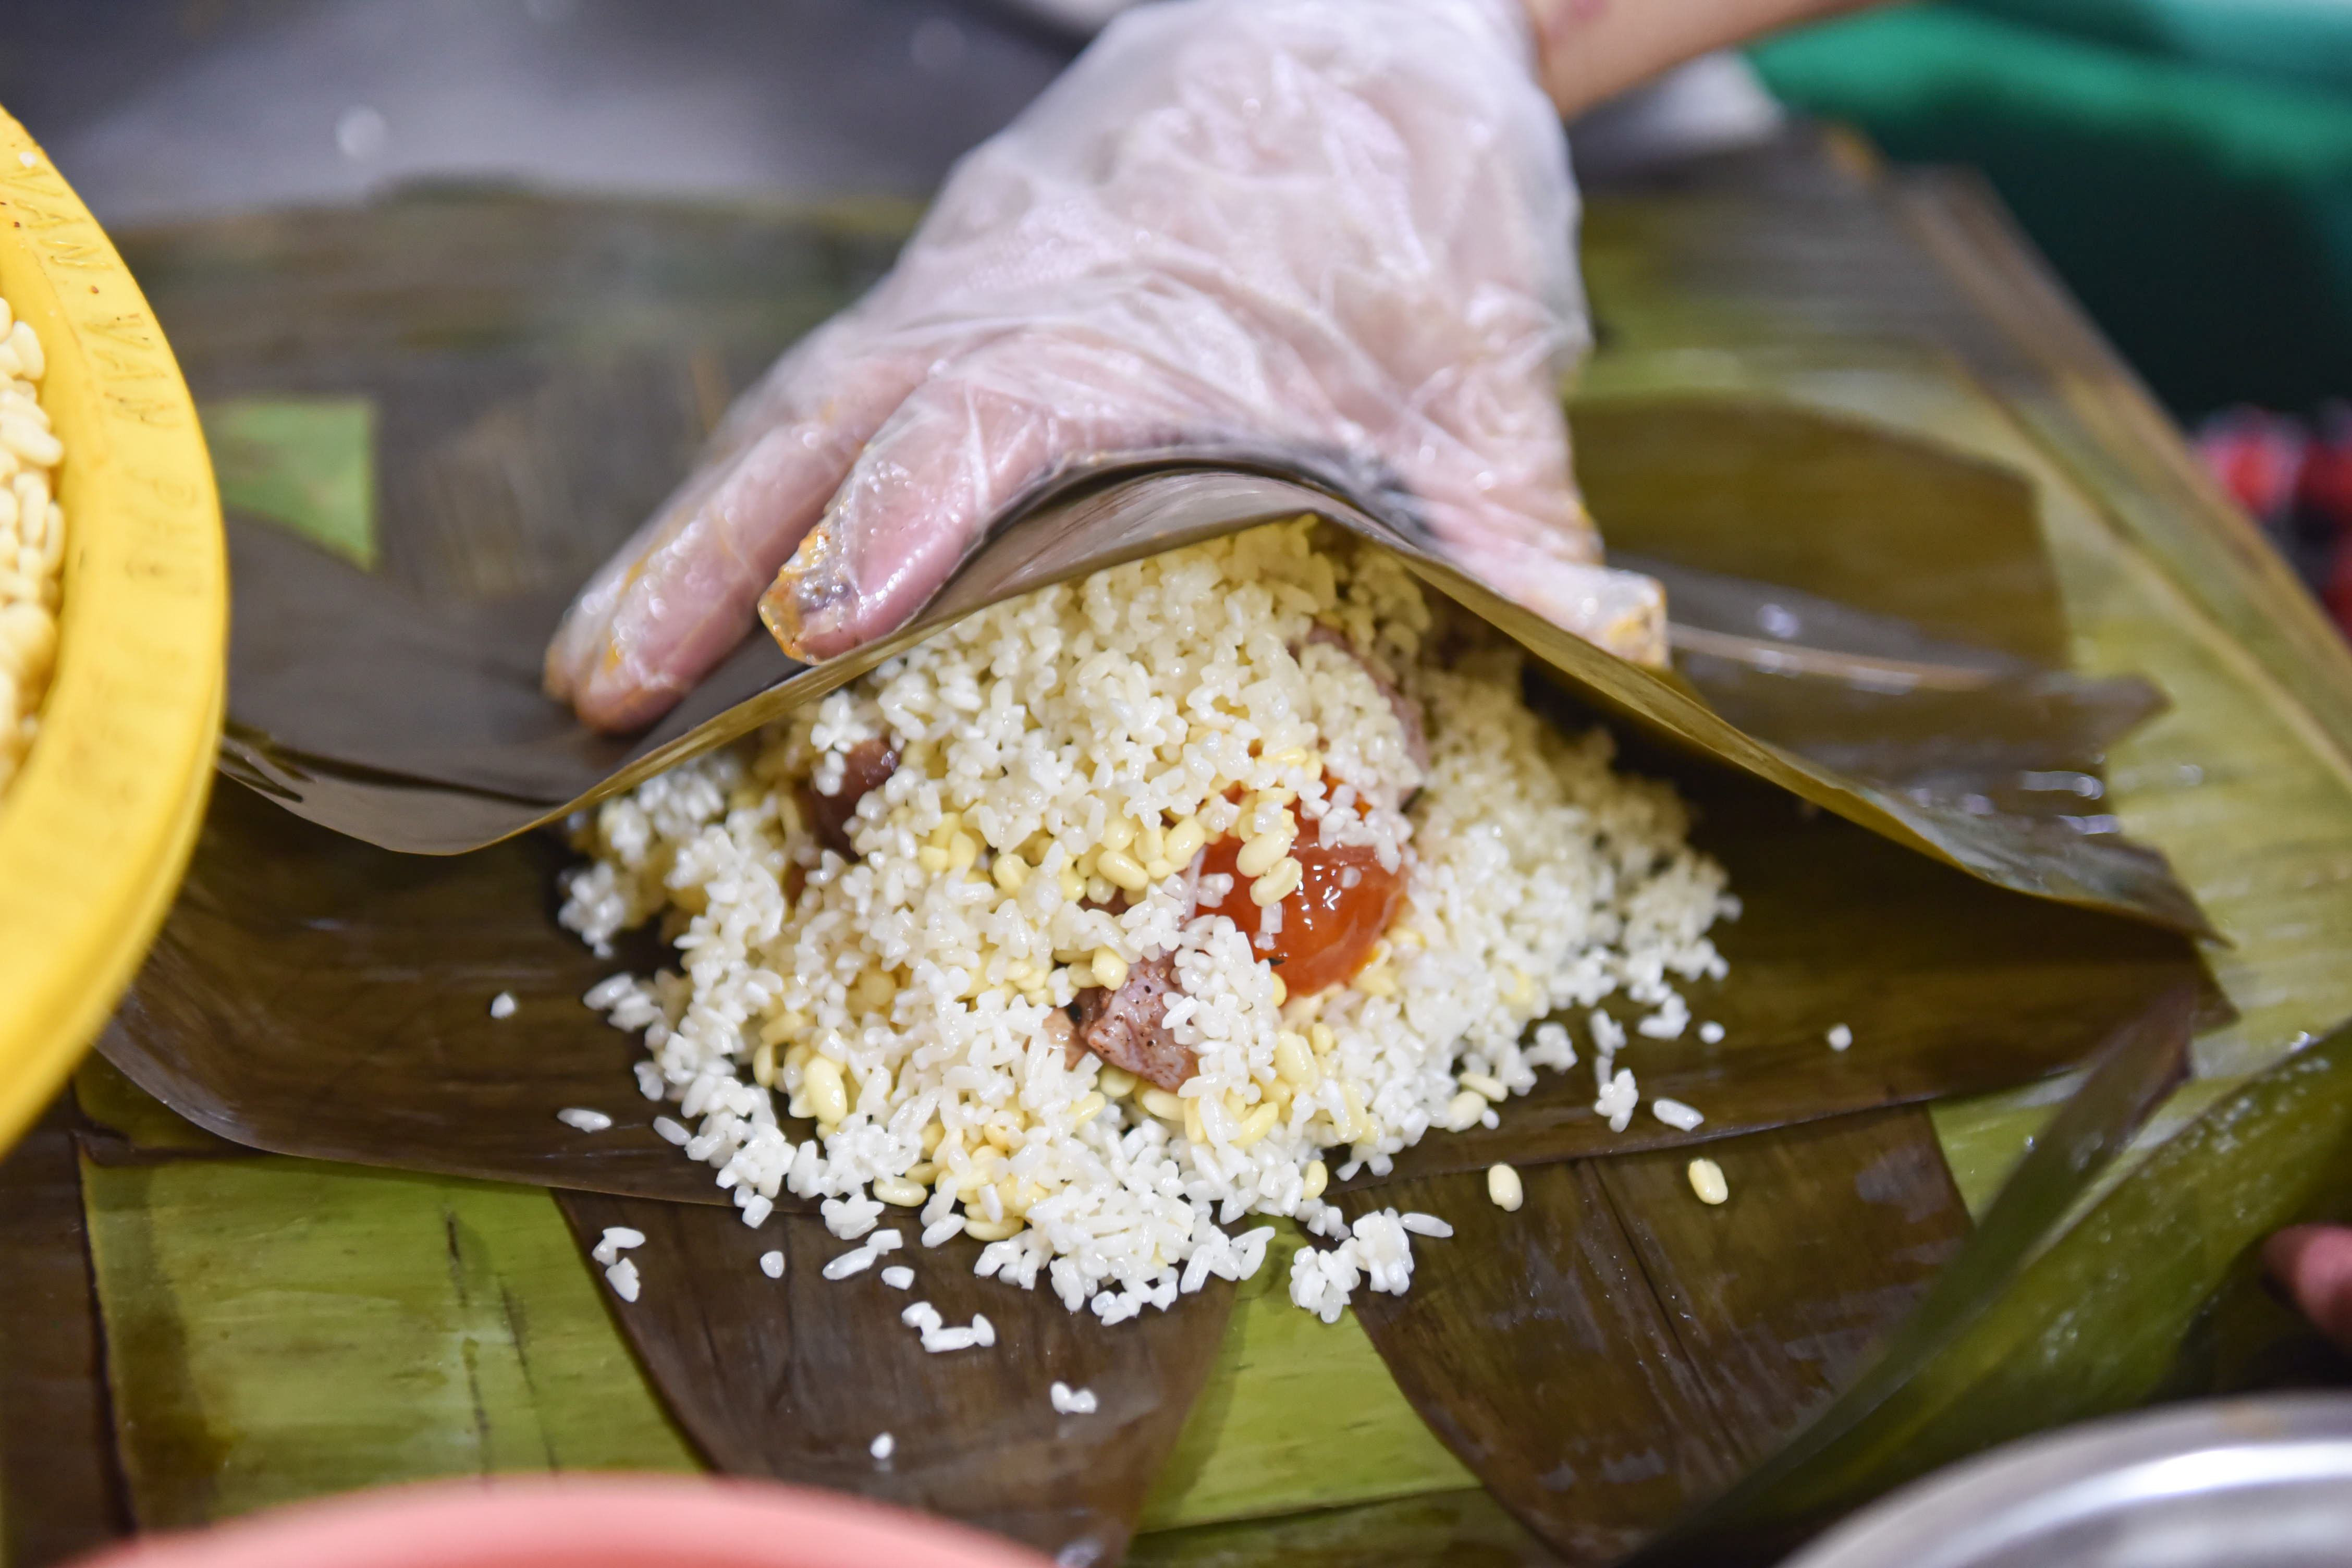 Zongzi being made at An Ky Banh Chung in District 11, Ho Chi Minh City. Photo: Ngoc Phuong / Tuoi Tre